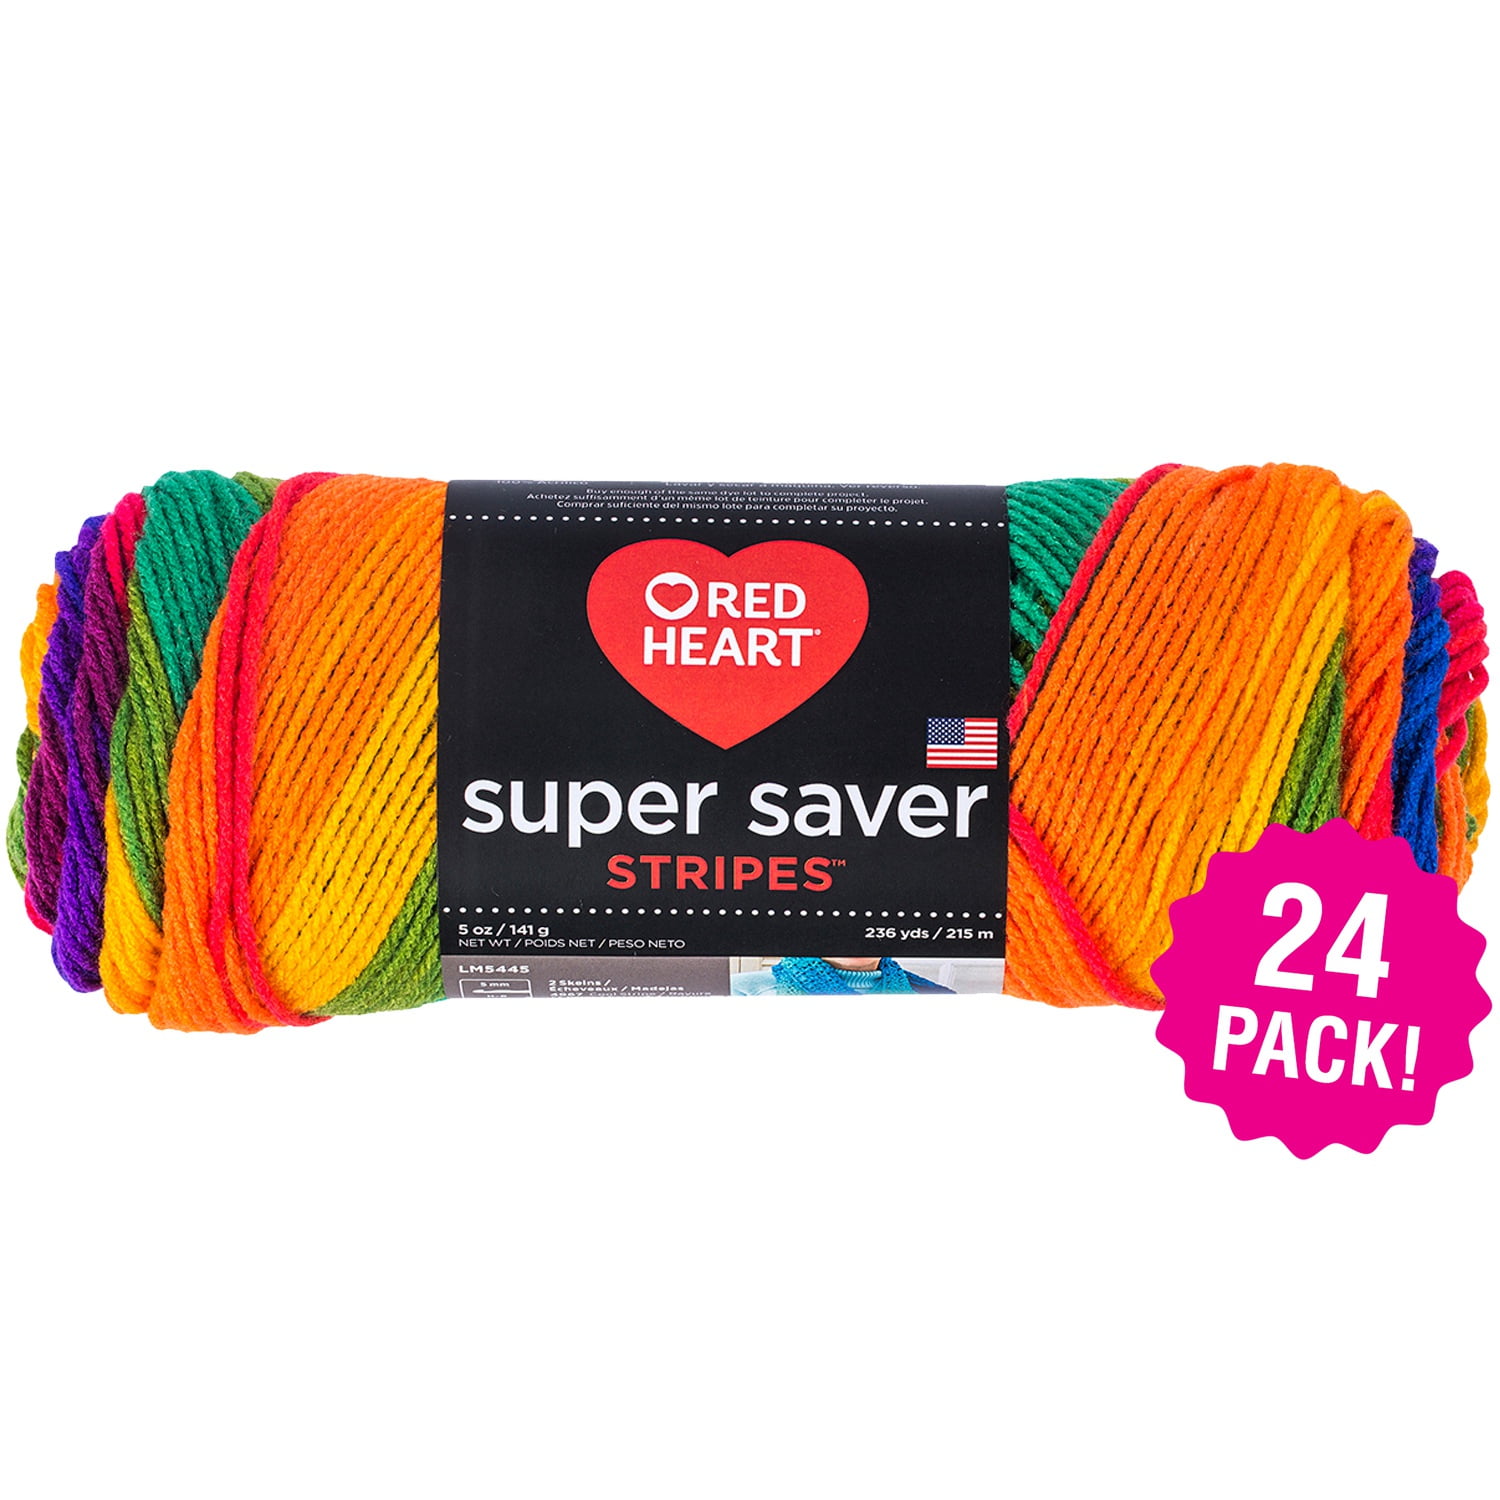 3 Pack-Red Heart Super Saver Yarn-Primary Stripes E300-3954